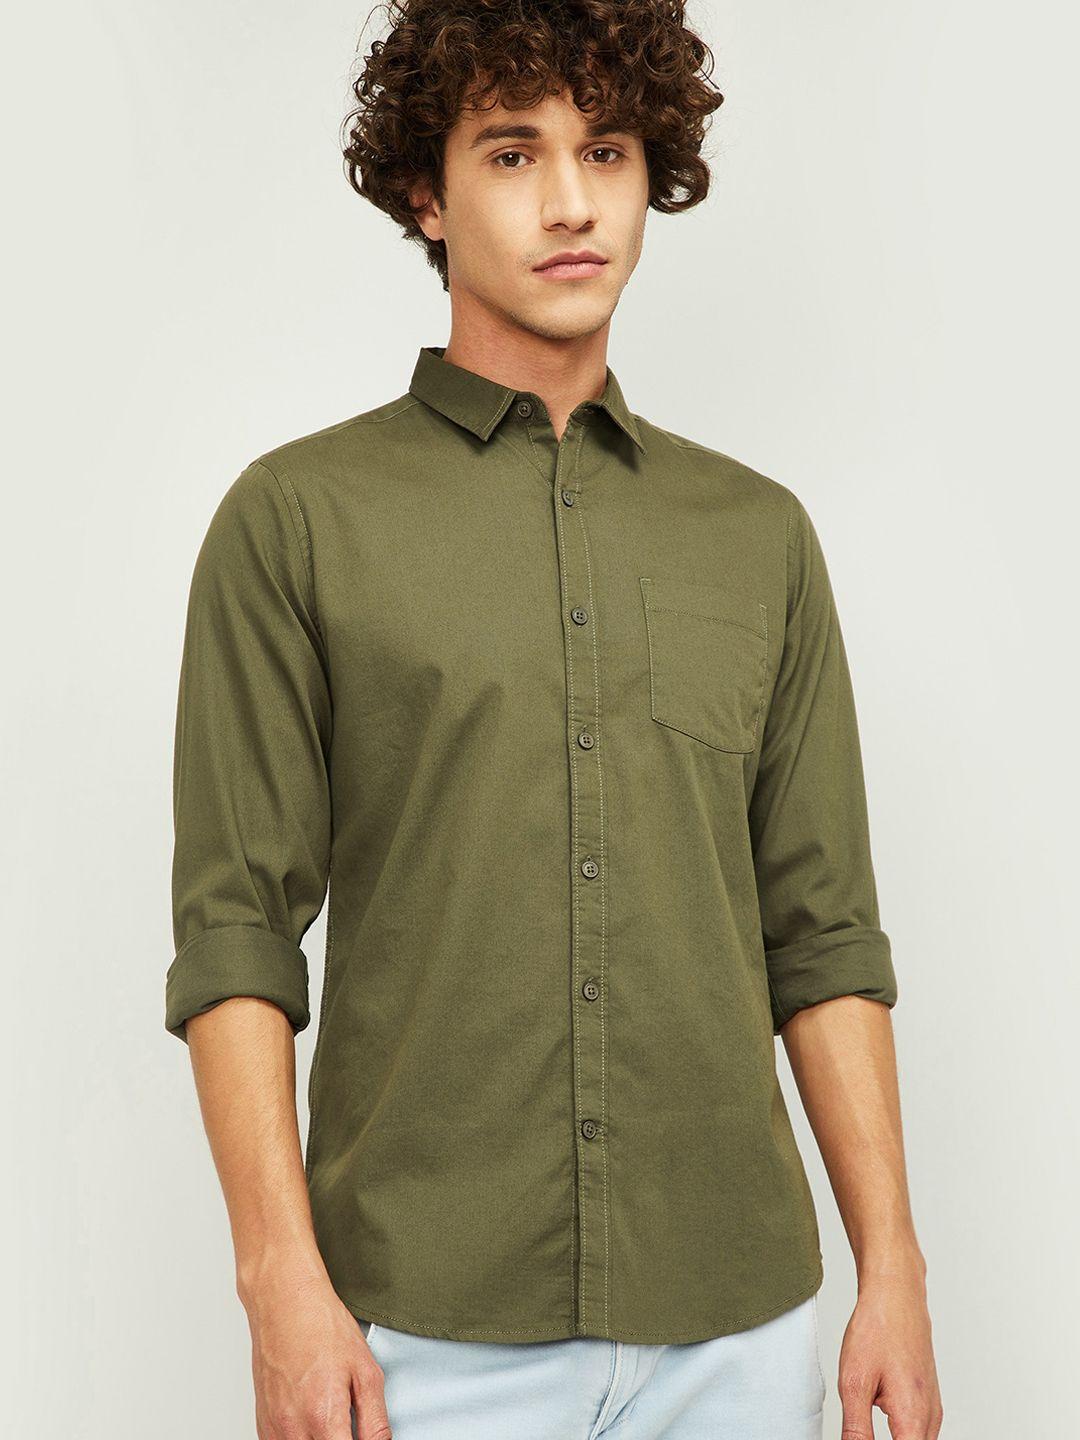 fame-forever-by-lifestyle-men-olive-green-slim-fit-casual-shirt